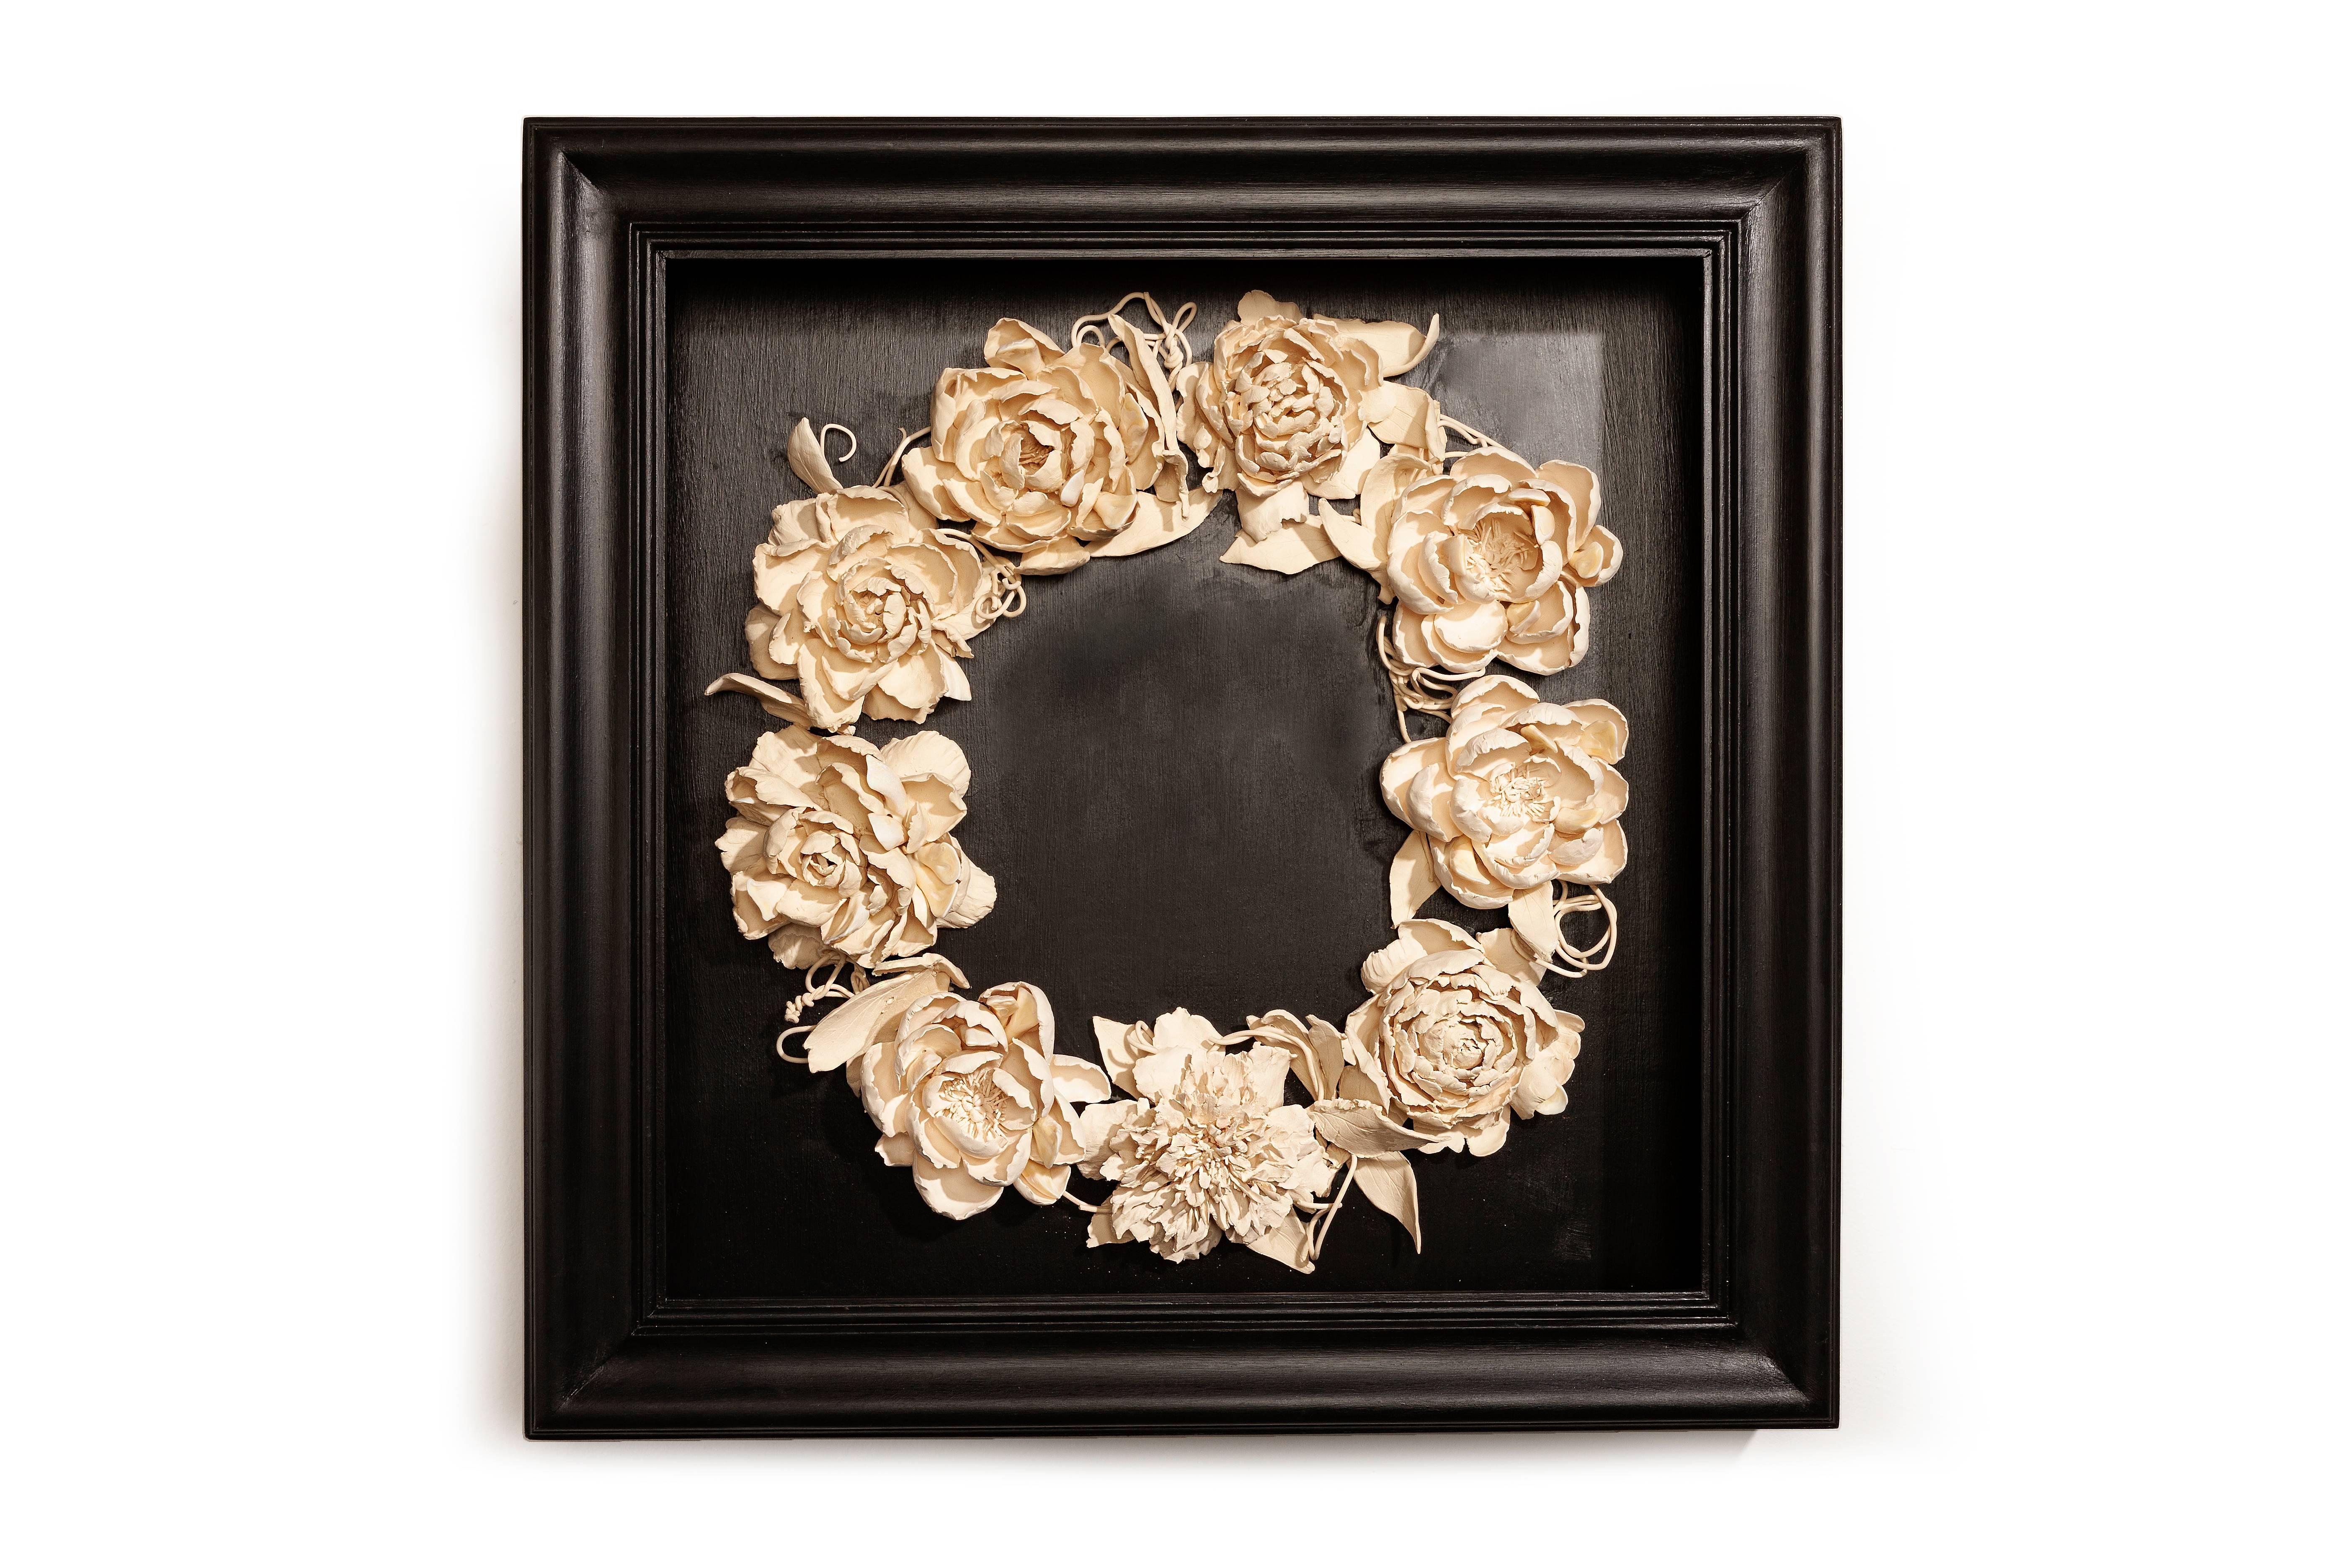 "Peony Wreath" wall hanging sculpture with hand made porcelain flowers and teeth - Sculpture by Marcy Lally